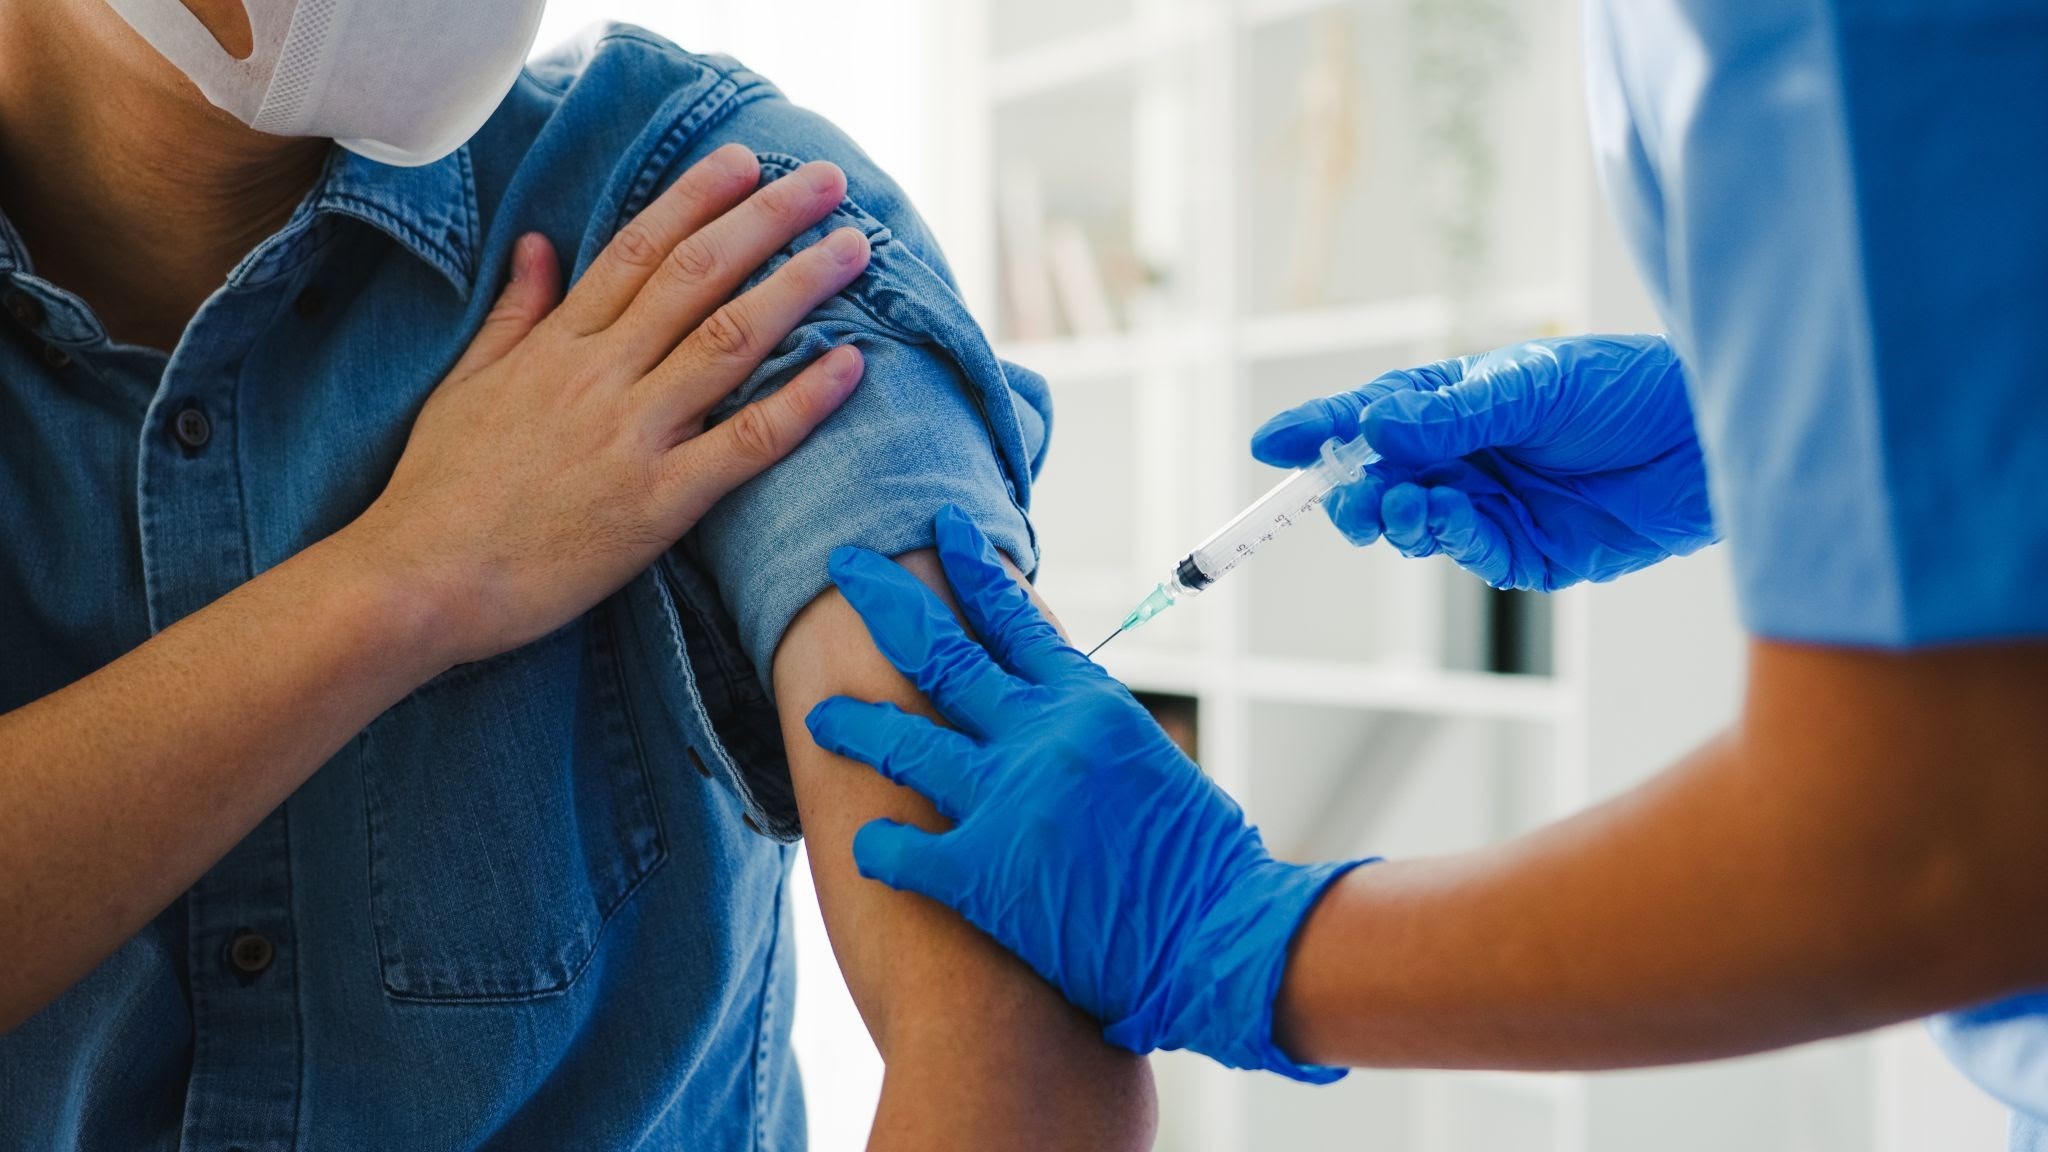 Why is it important to get vaccinated against COVID-19?